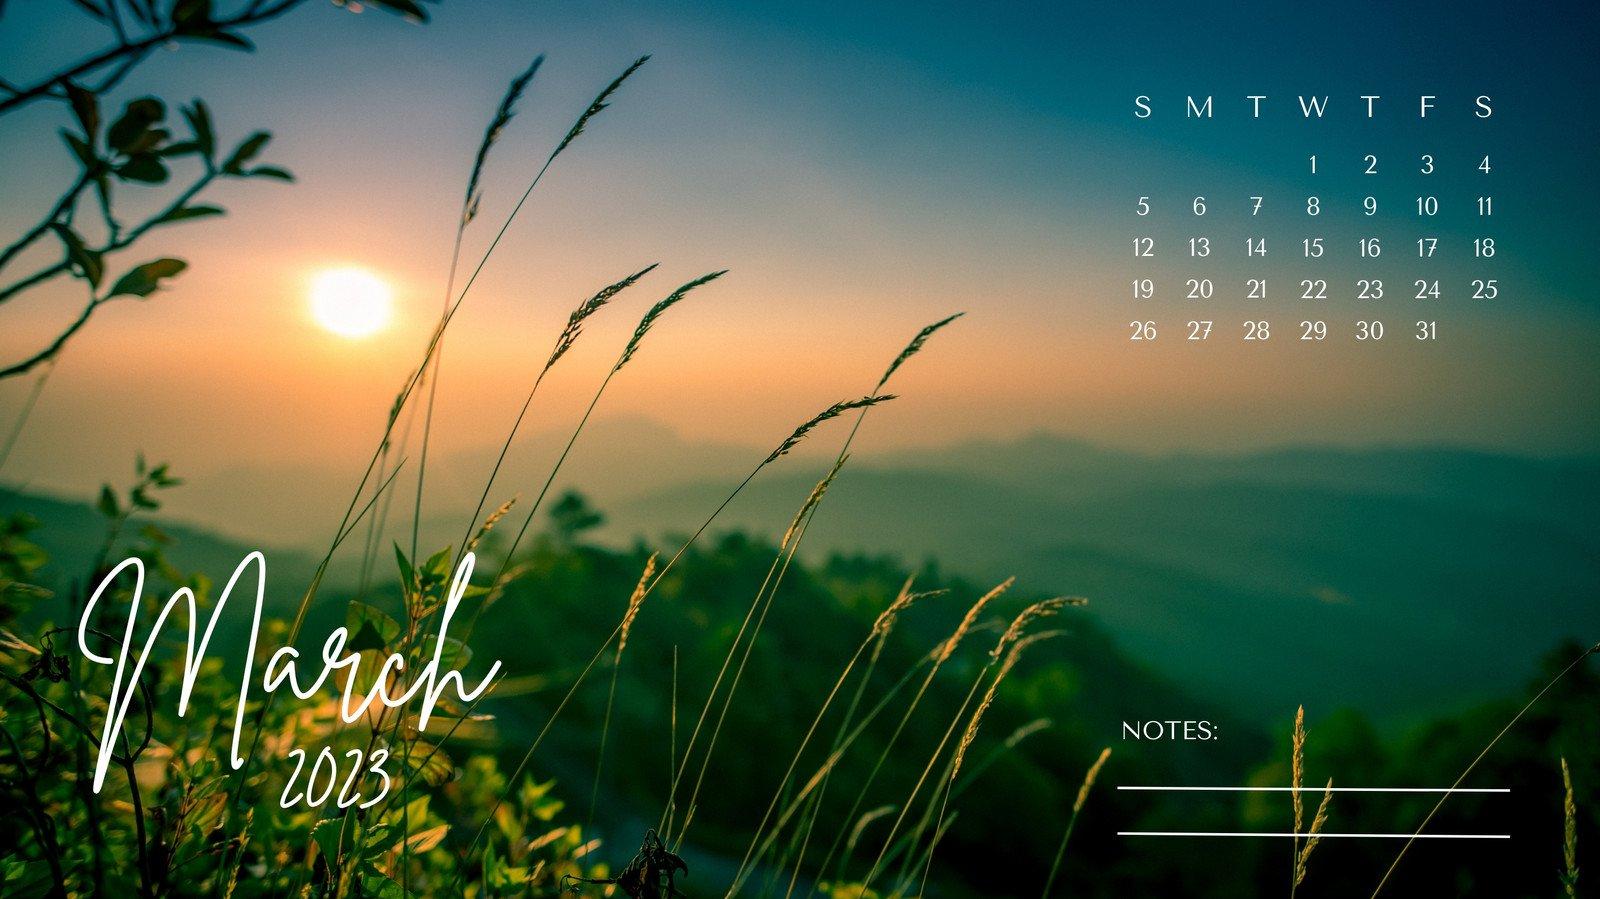 Page Free and customizable nature desktop wallpaper templates